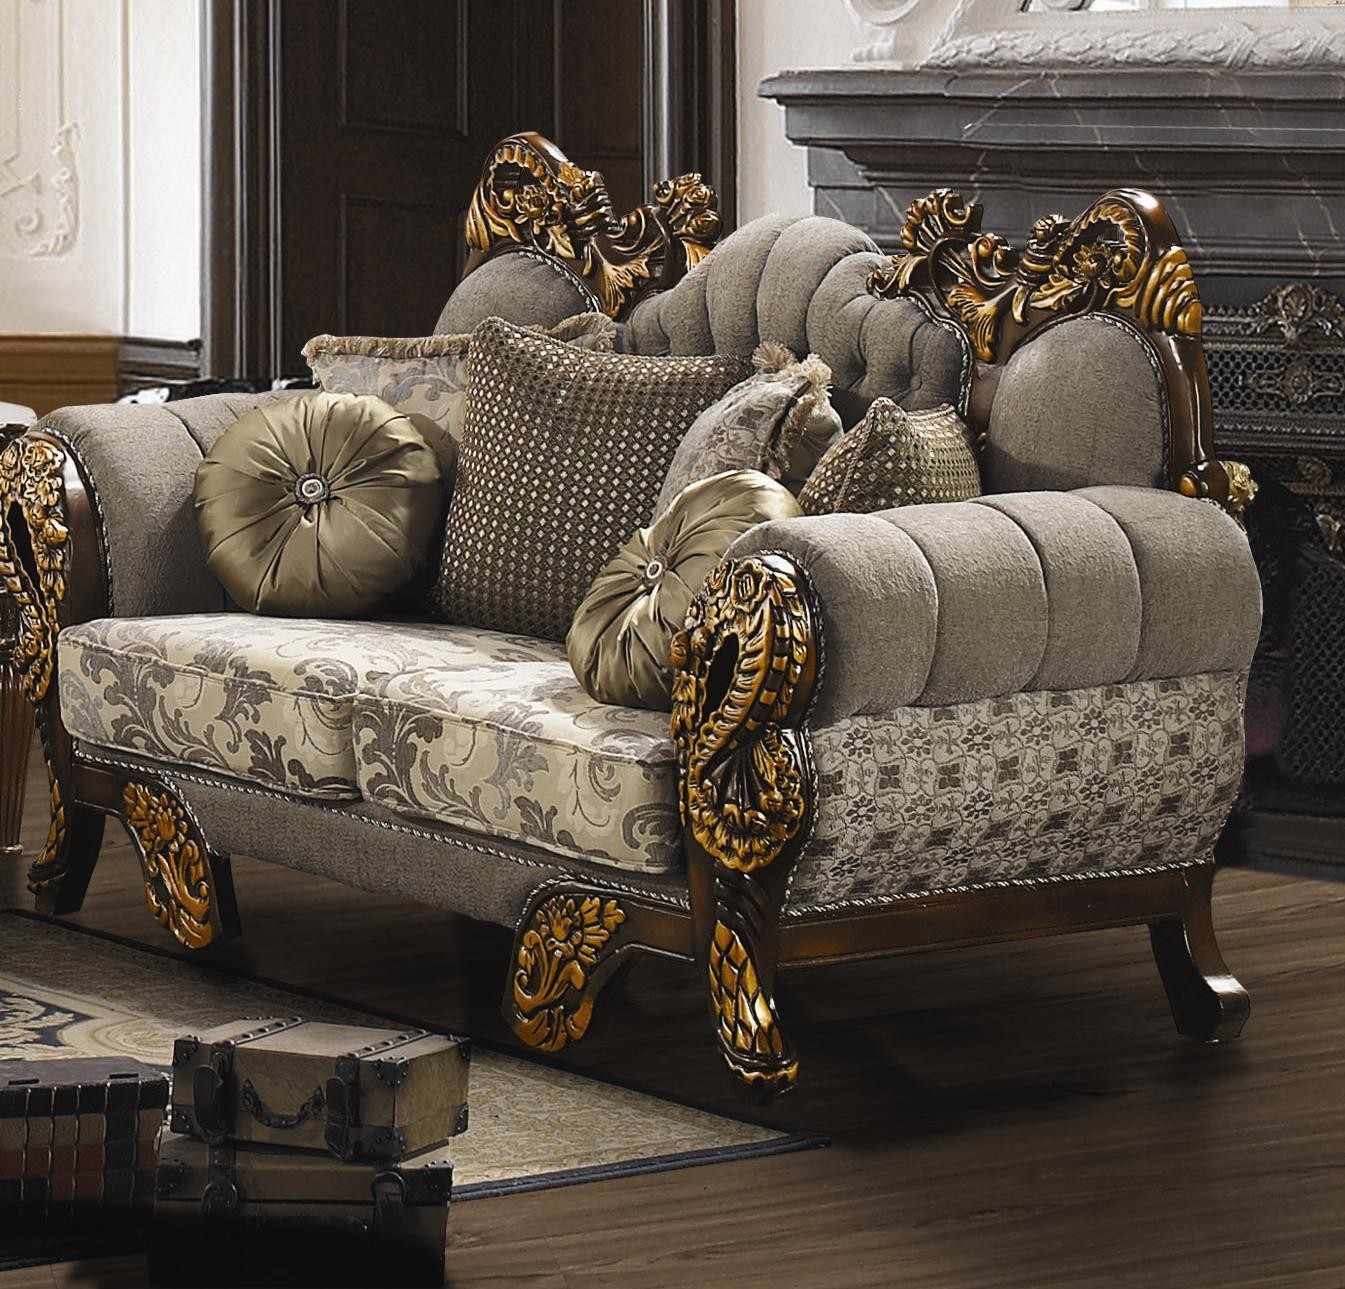 Victorian inspired luxury formal living room furniture hd 275 2